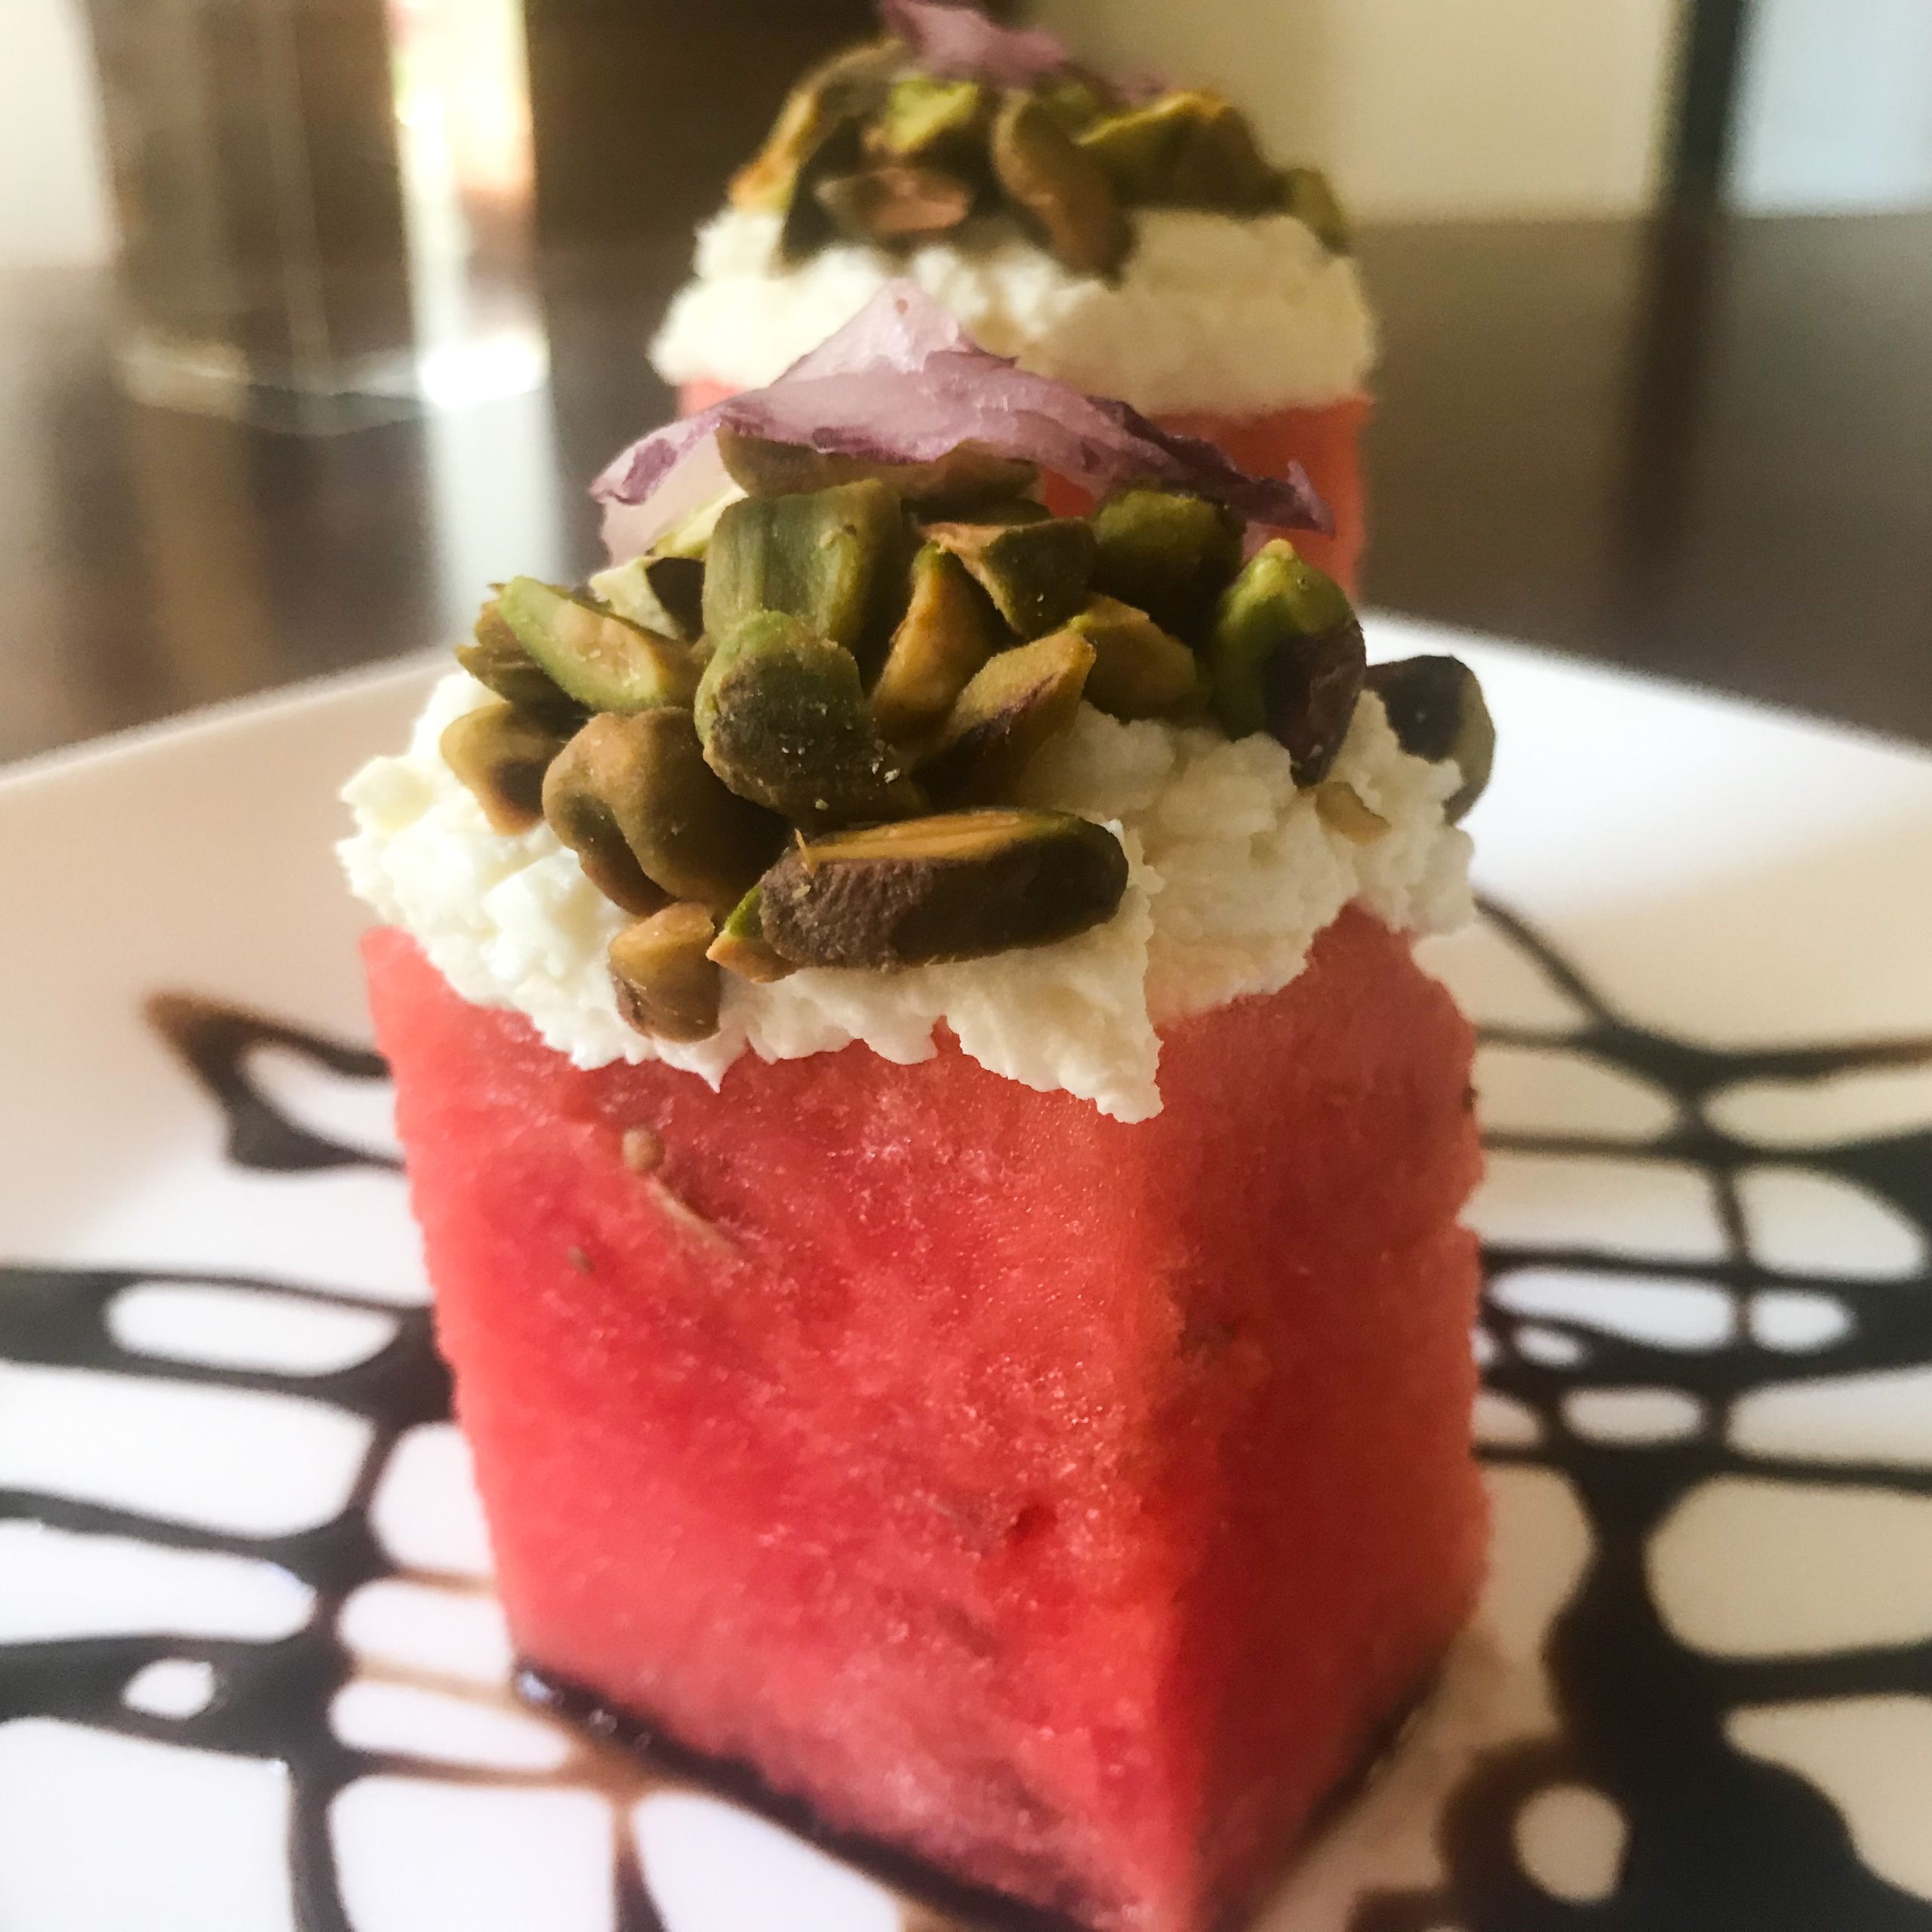 finished watermelon stacks with feta and pistachios and balsamic glaze